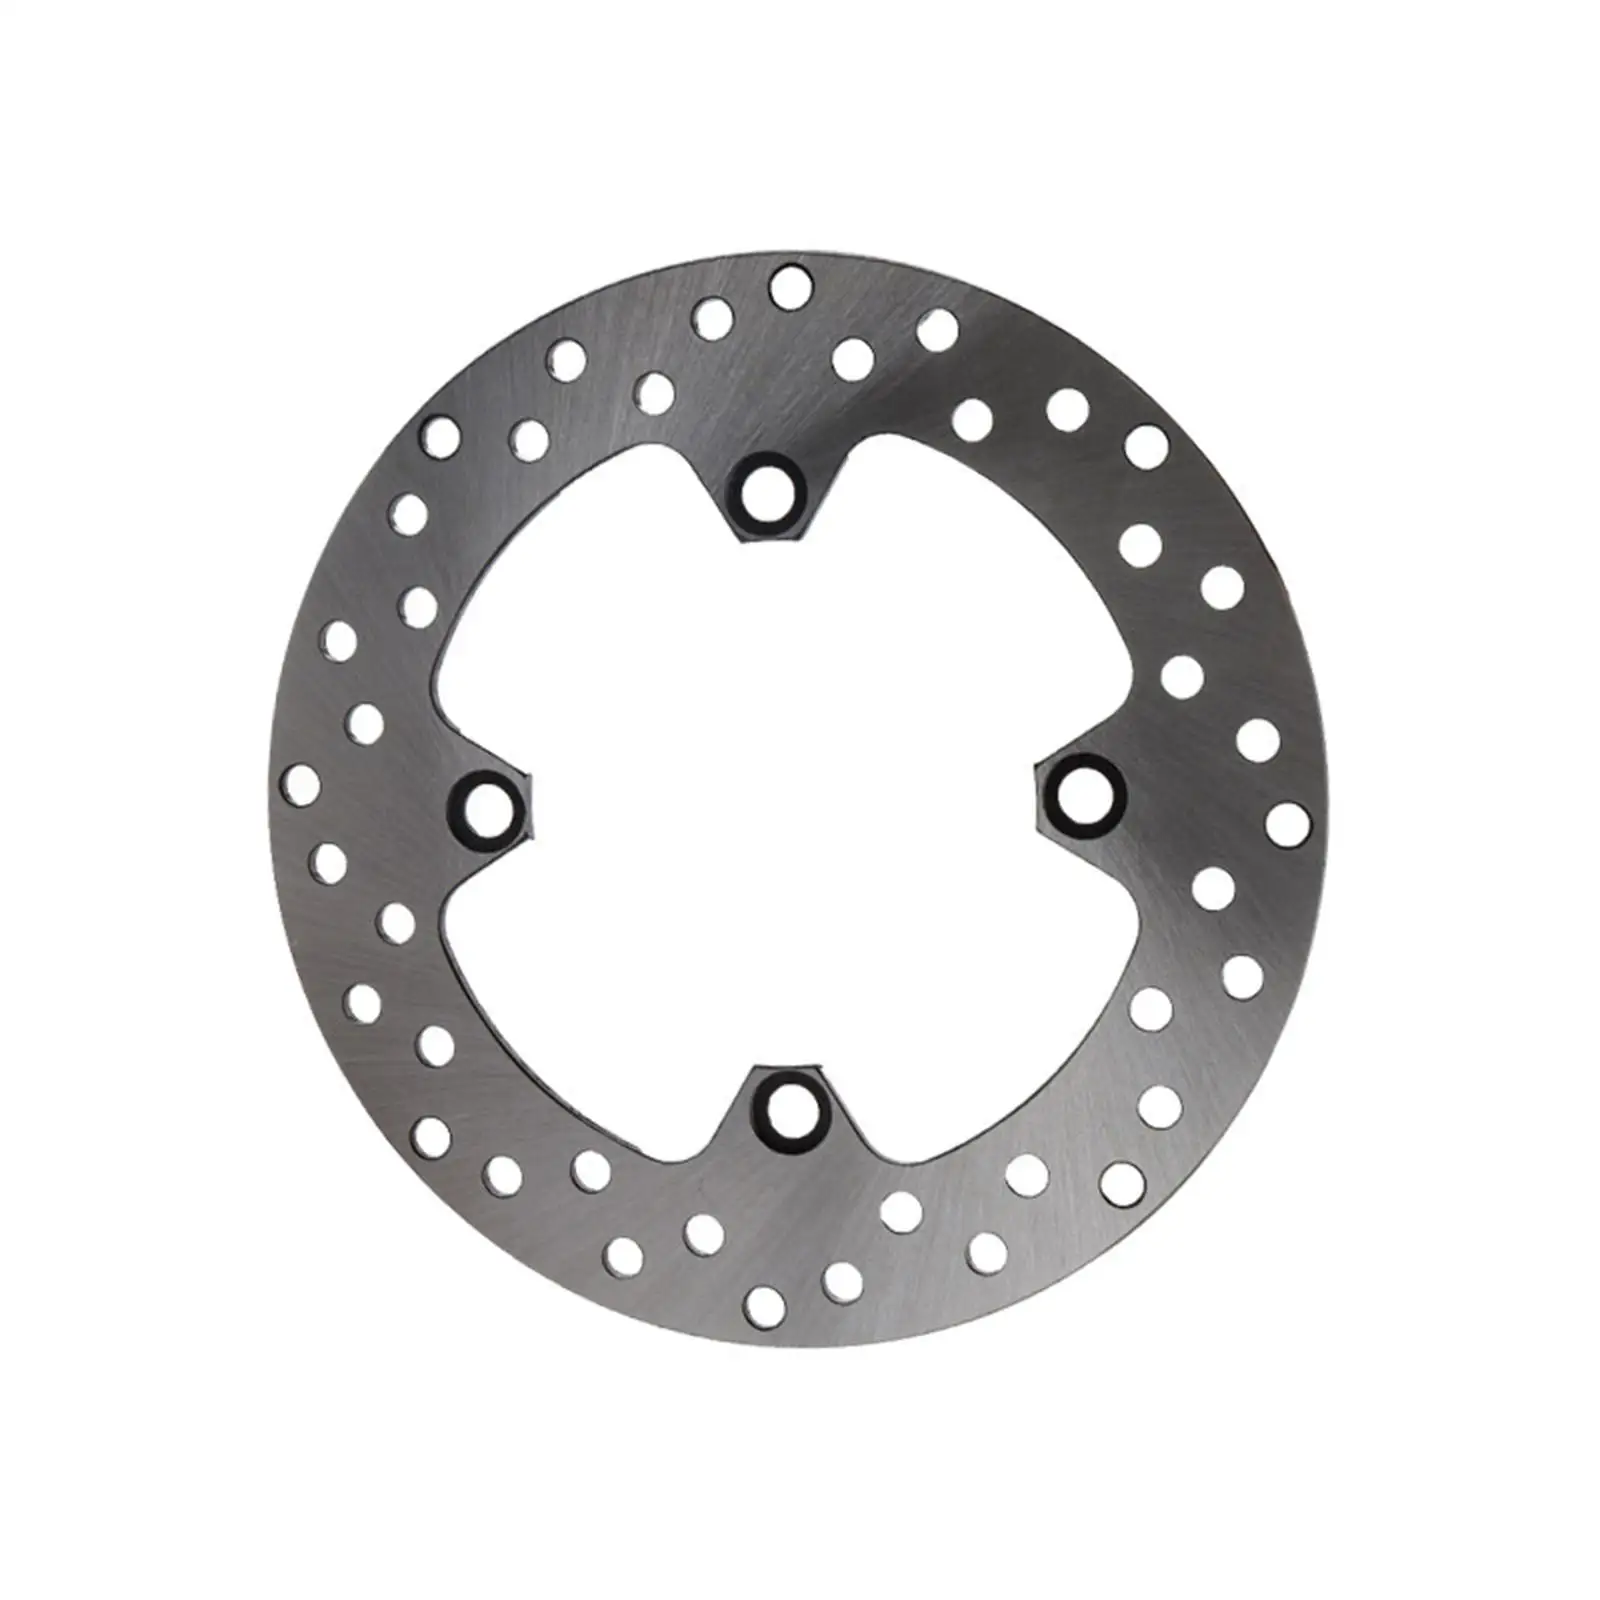 Motorcycle Brake Disc Rotor Wear Resistant Professional Replaces Assembly for Honda CBR125R XR250R Xlv Varasx125 TRX400EX